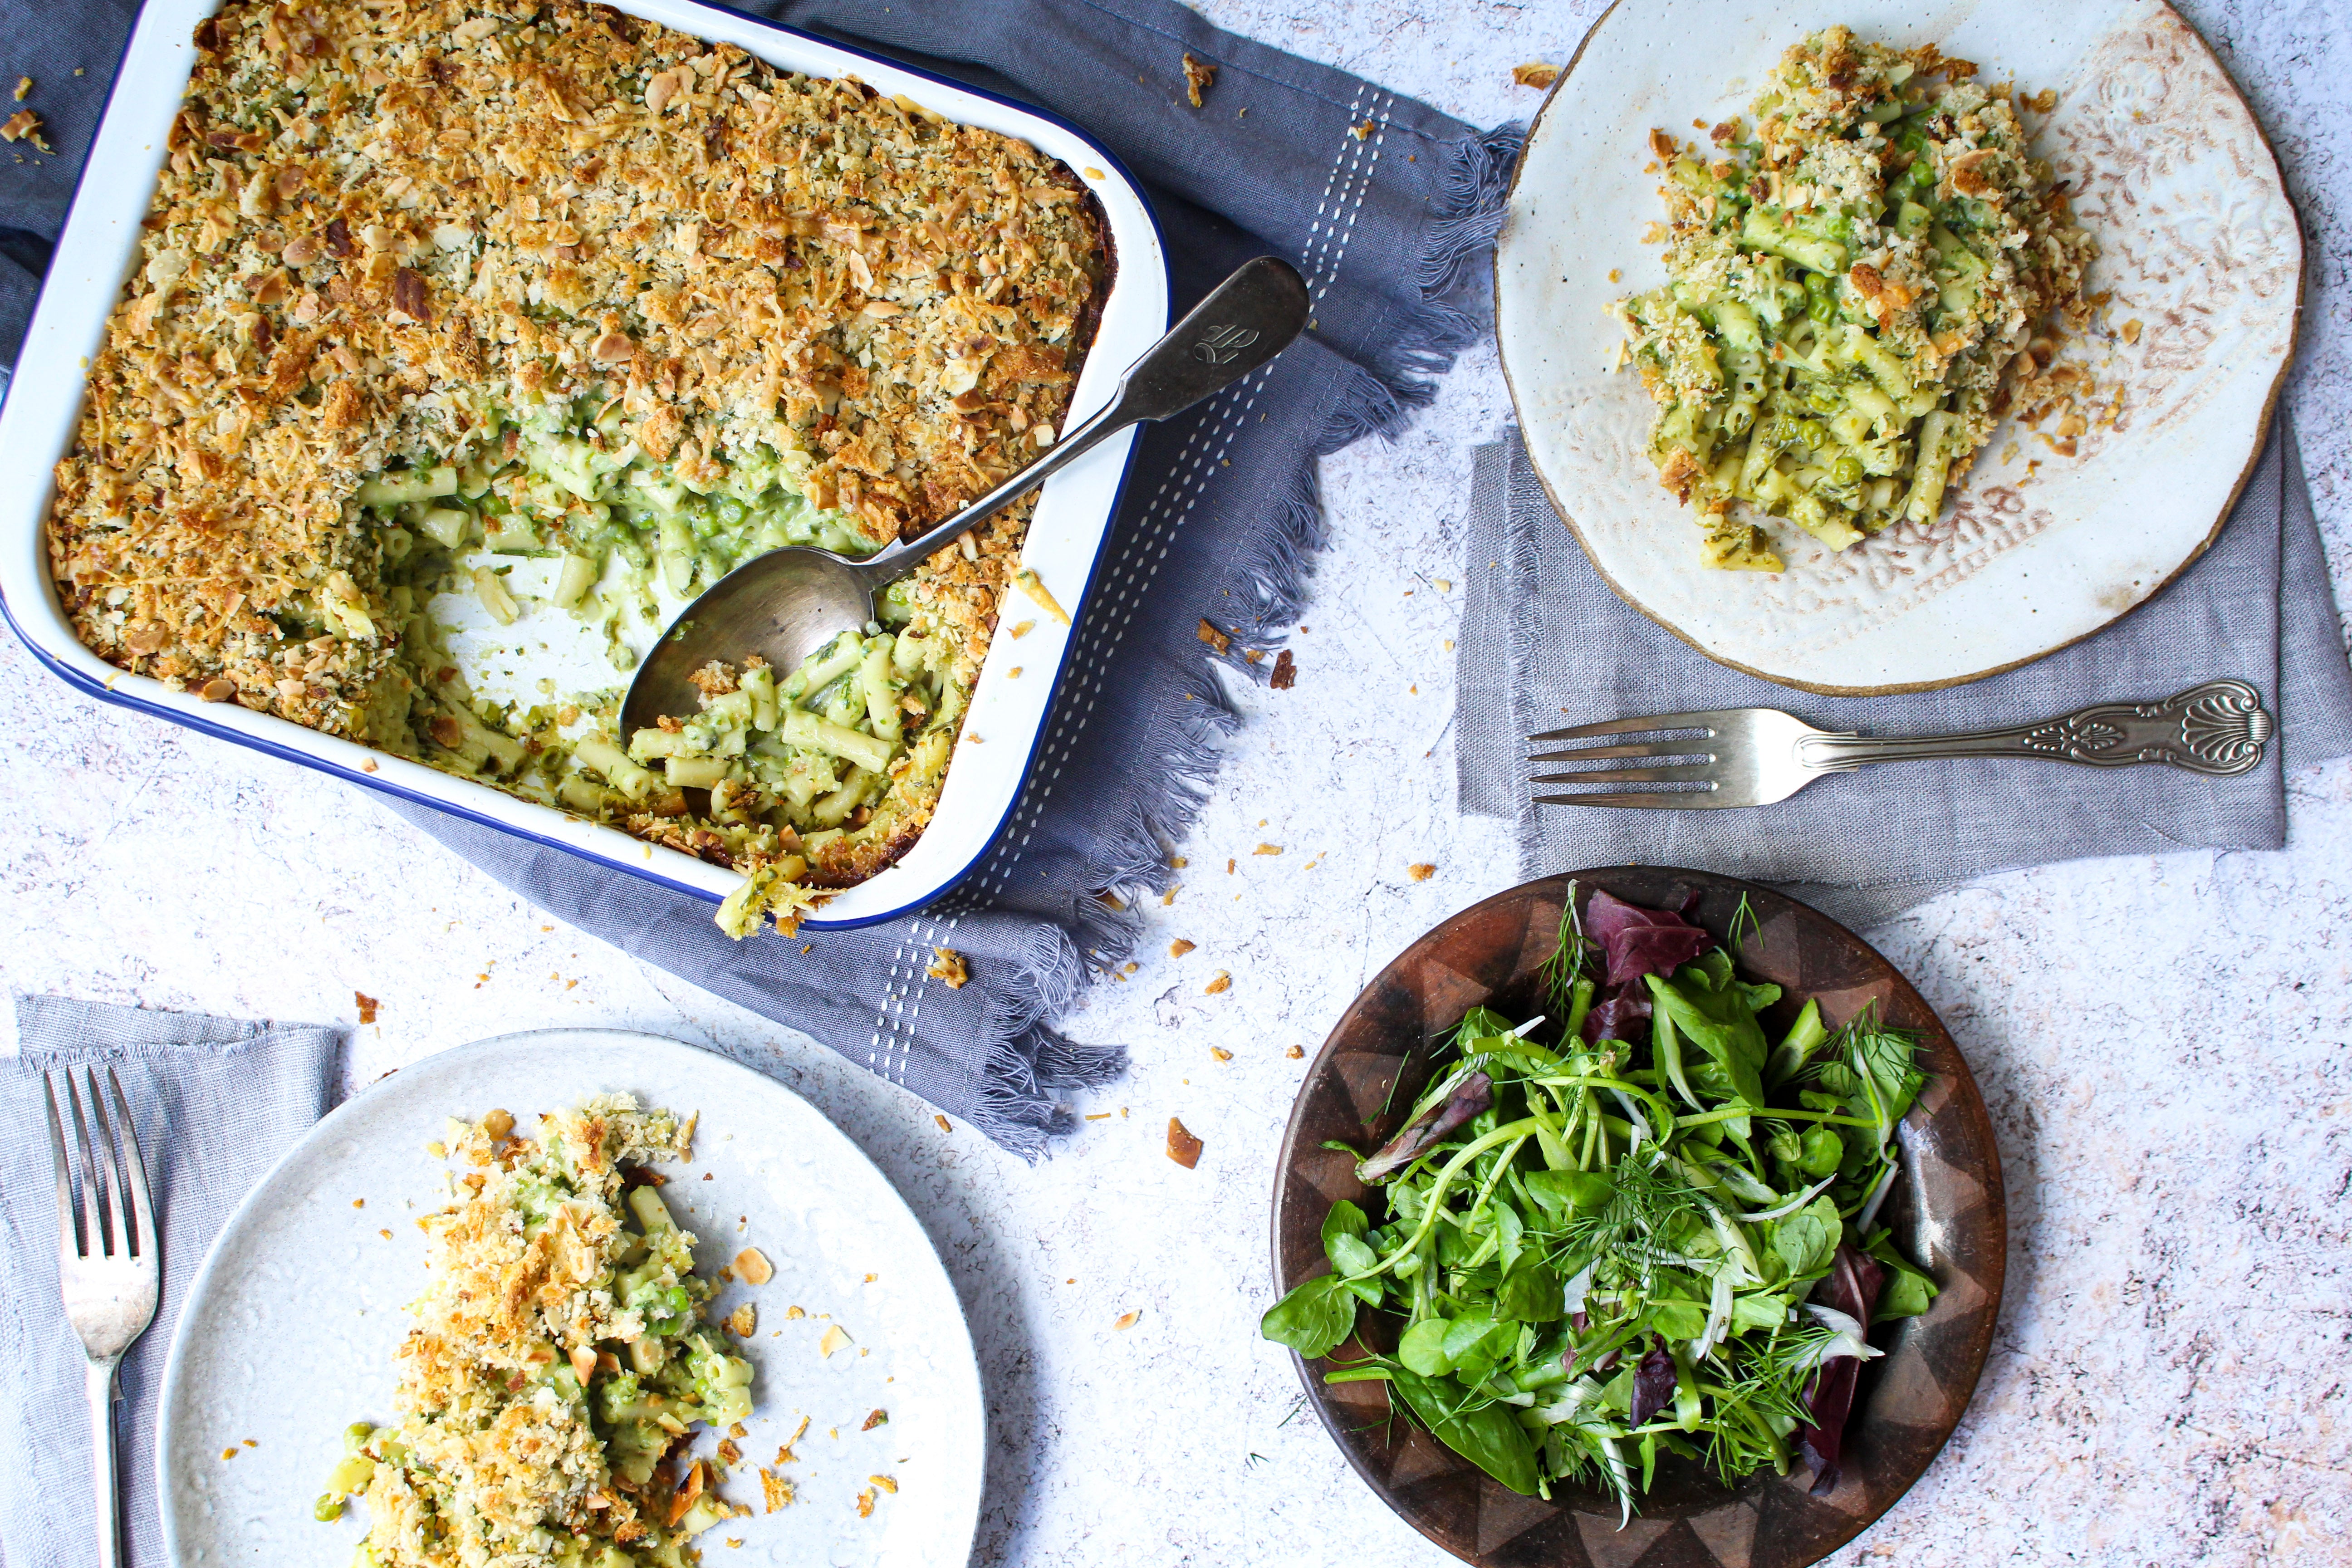 Piping hot – and green – mac’n’cheese fresh out of the oven is a sight to behold